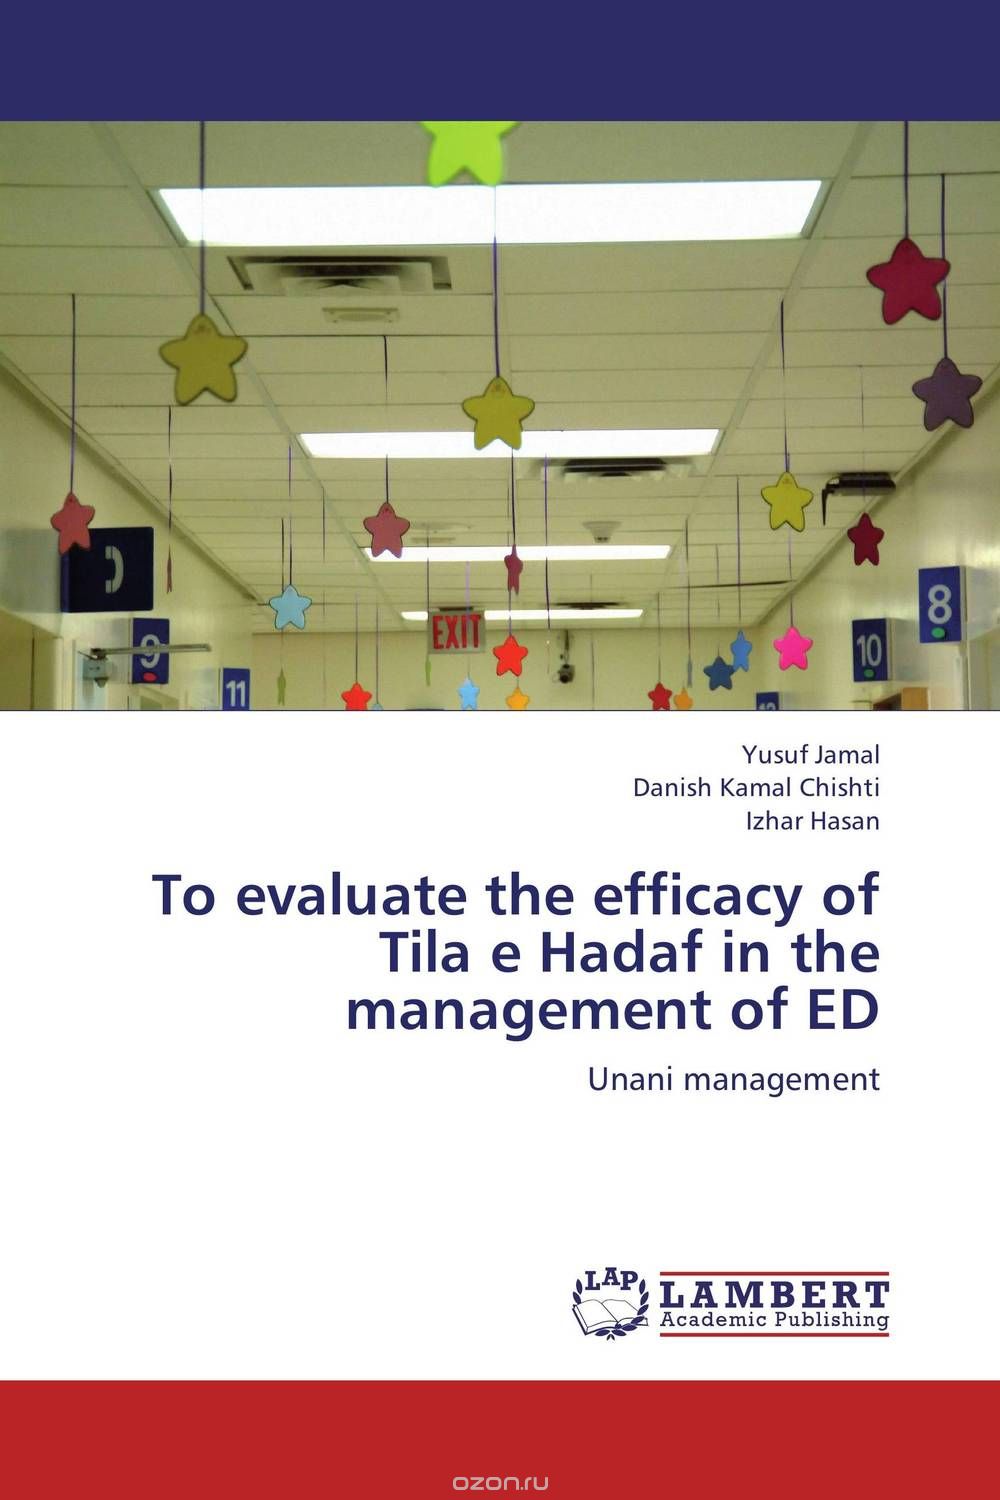 Скачать книгу "To evaluate the efficacy of Tila e Hadaf in the management of ED"